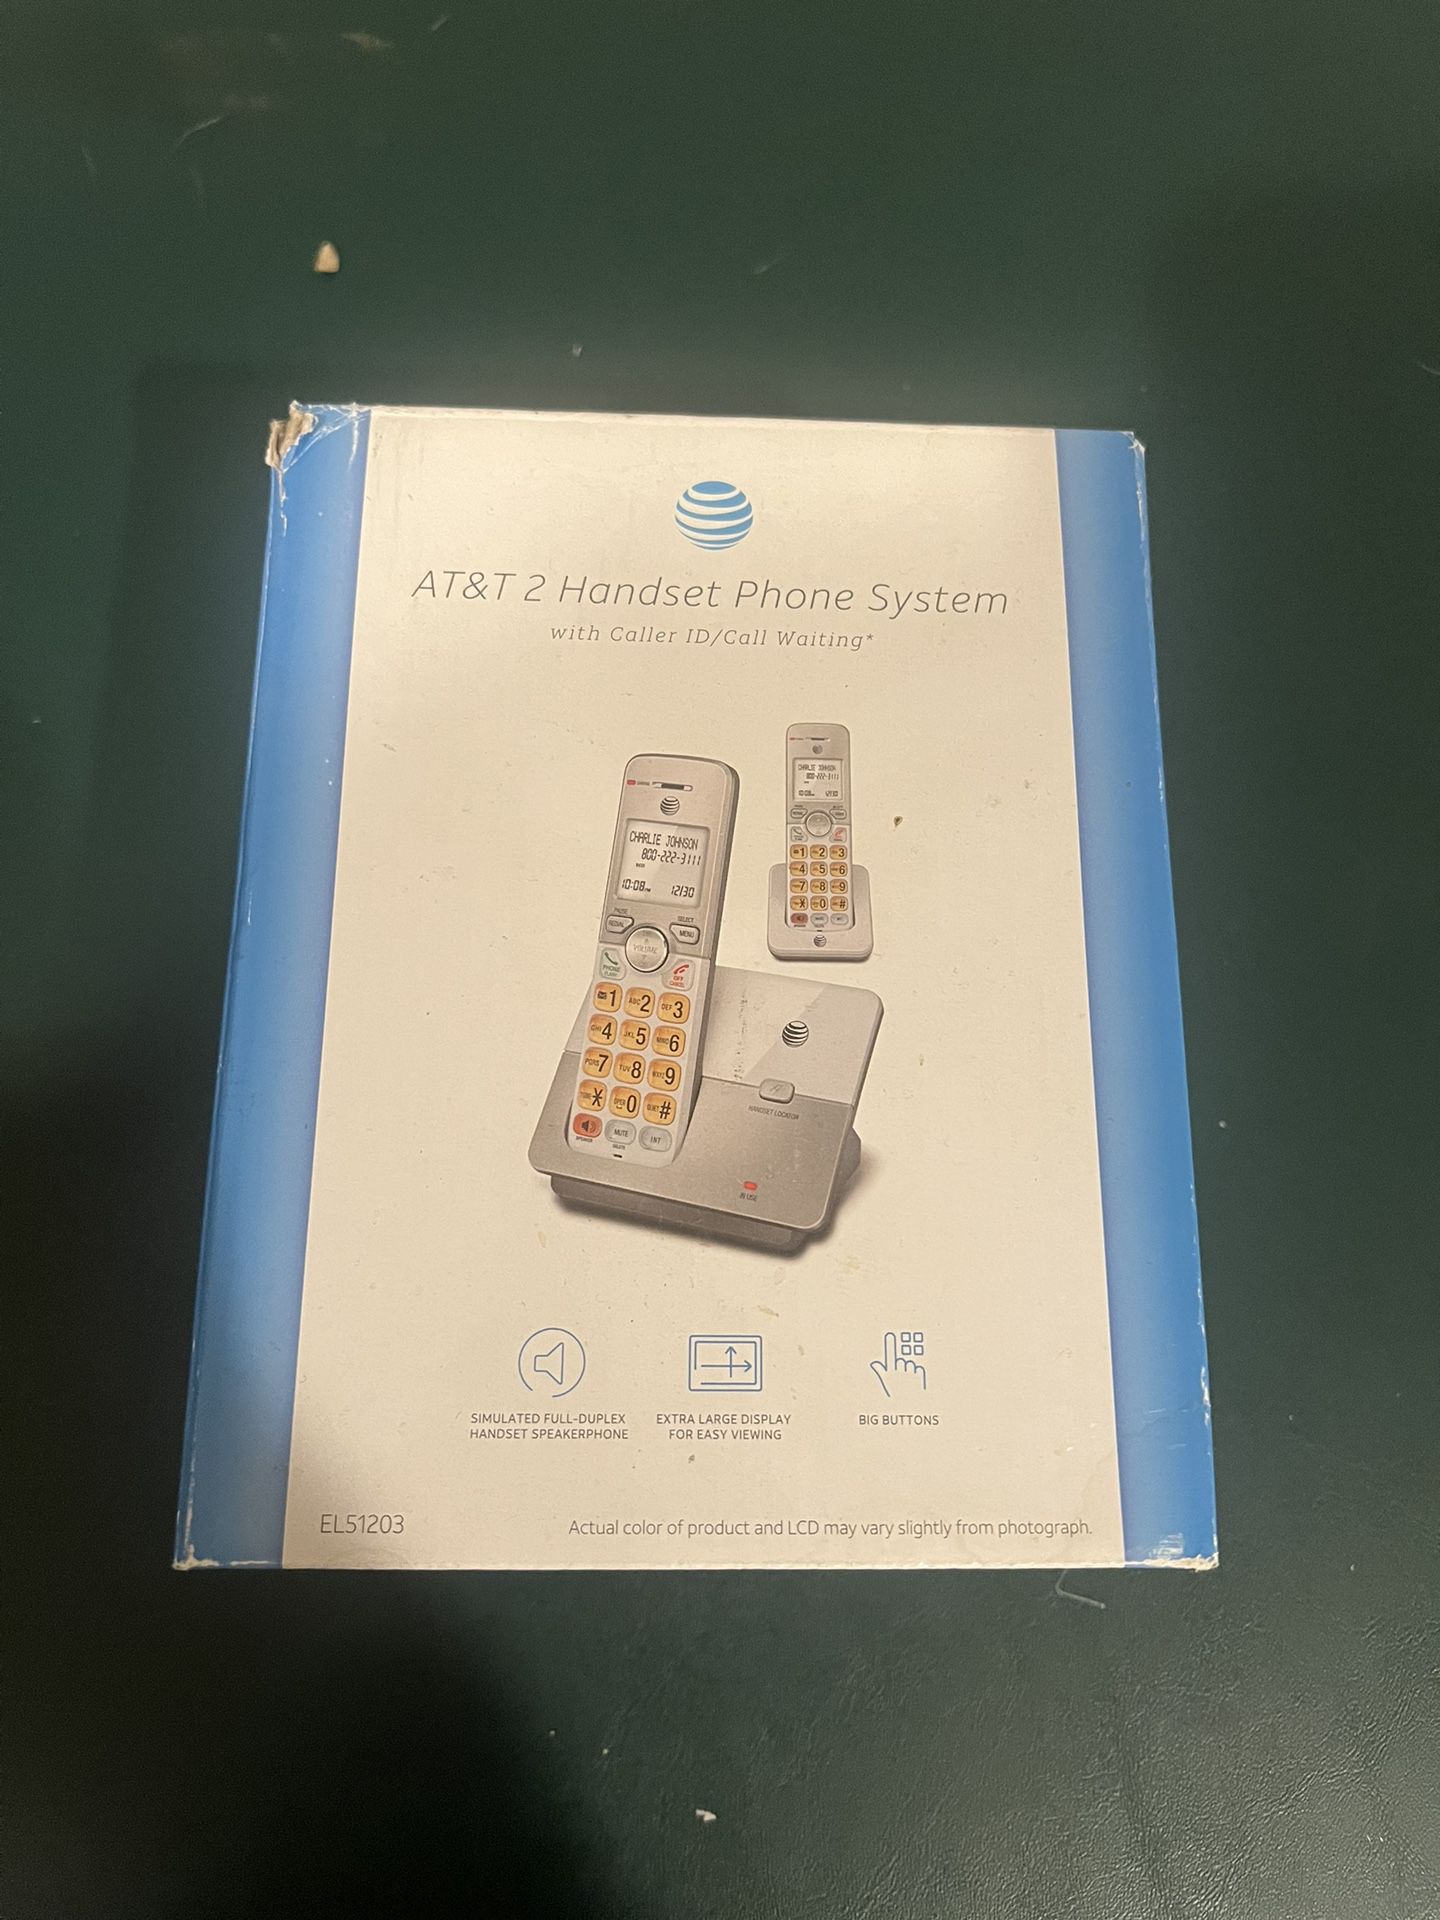 AT&T 2 Handset Phone System